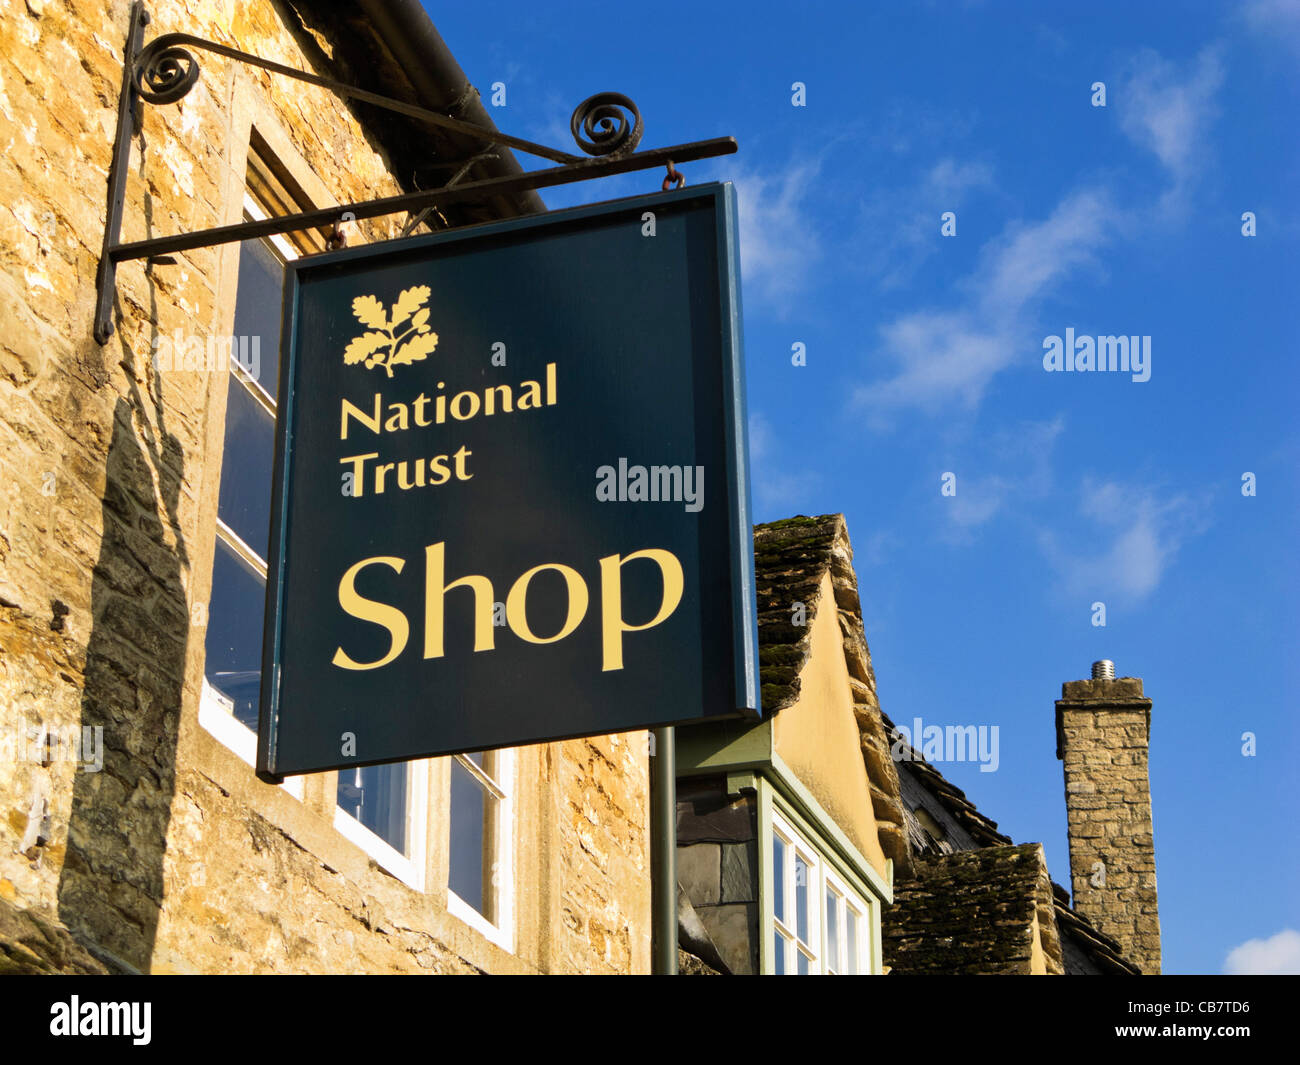 National Trust shop sign in Lacock, Wiltshire, England, UK Banque D'Images